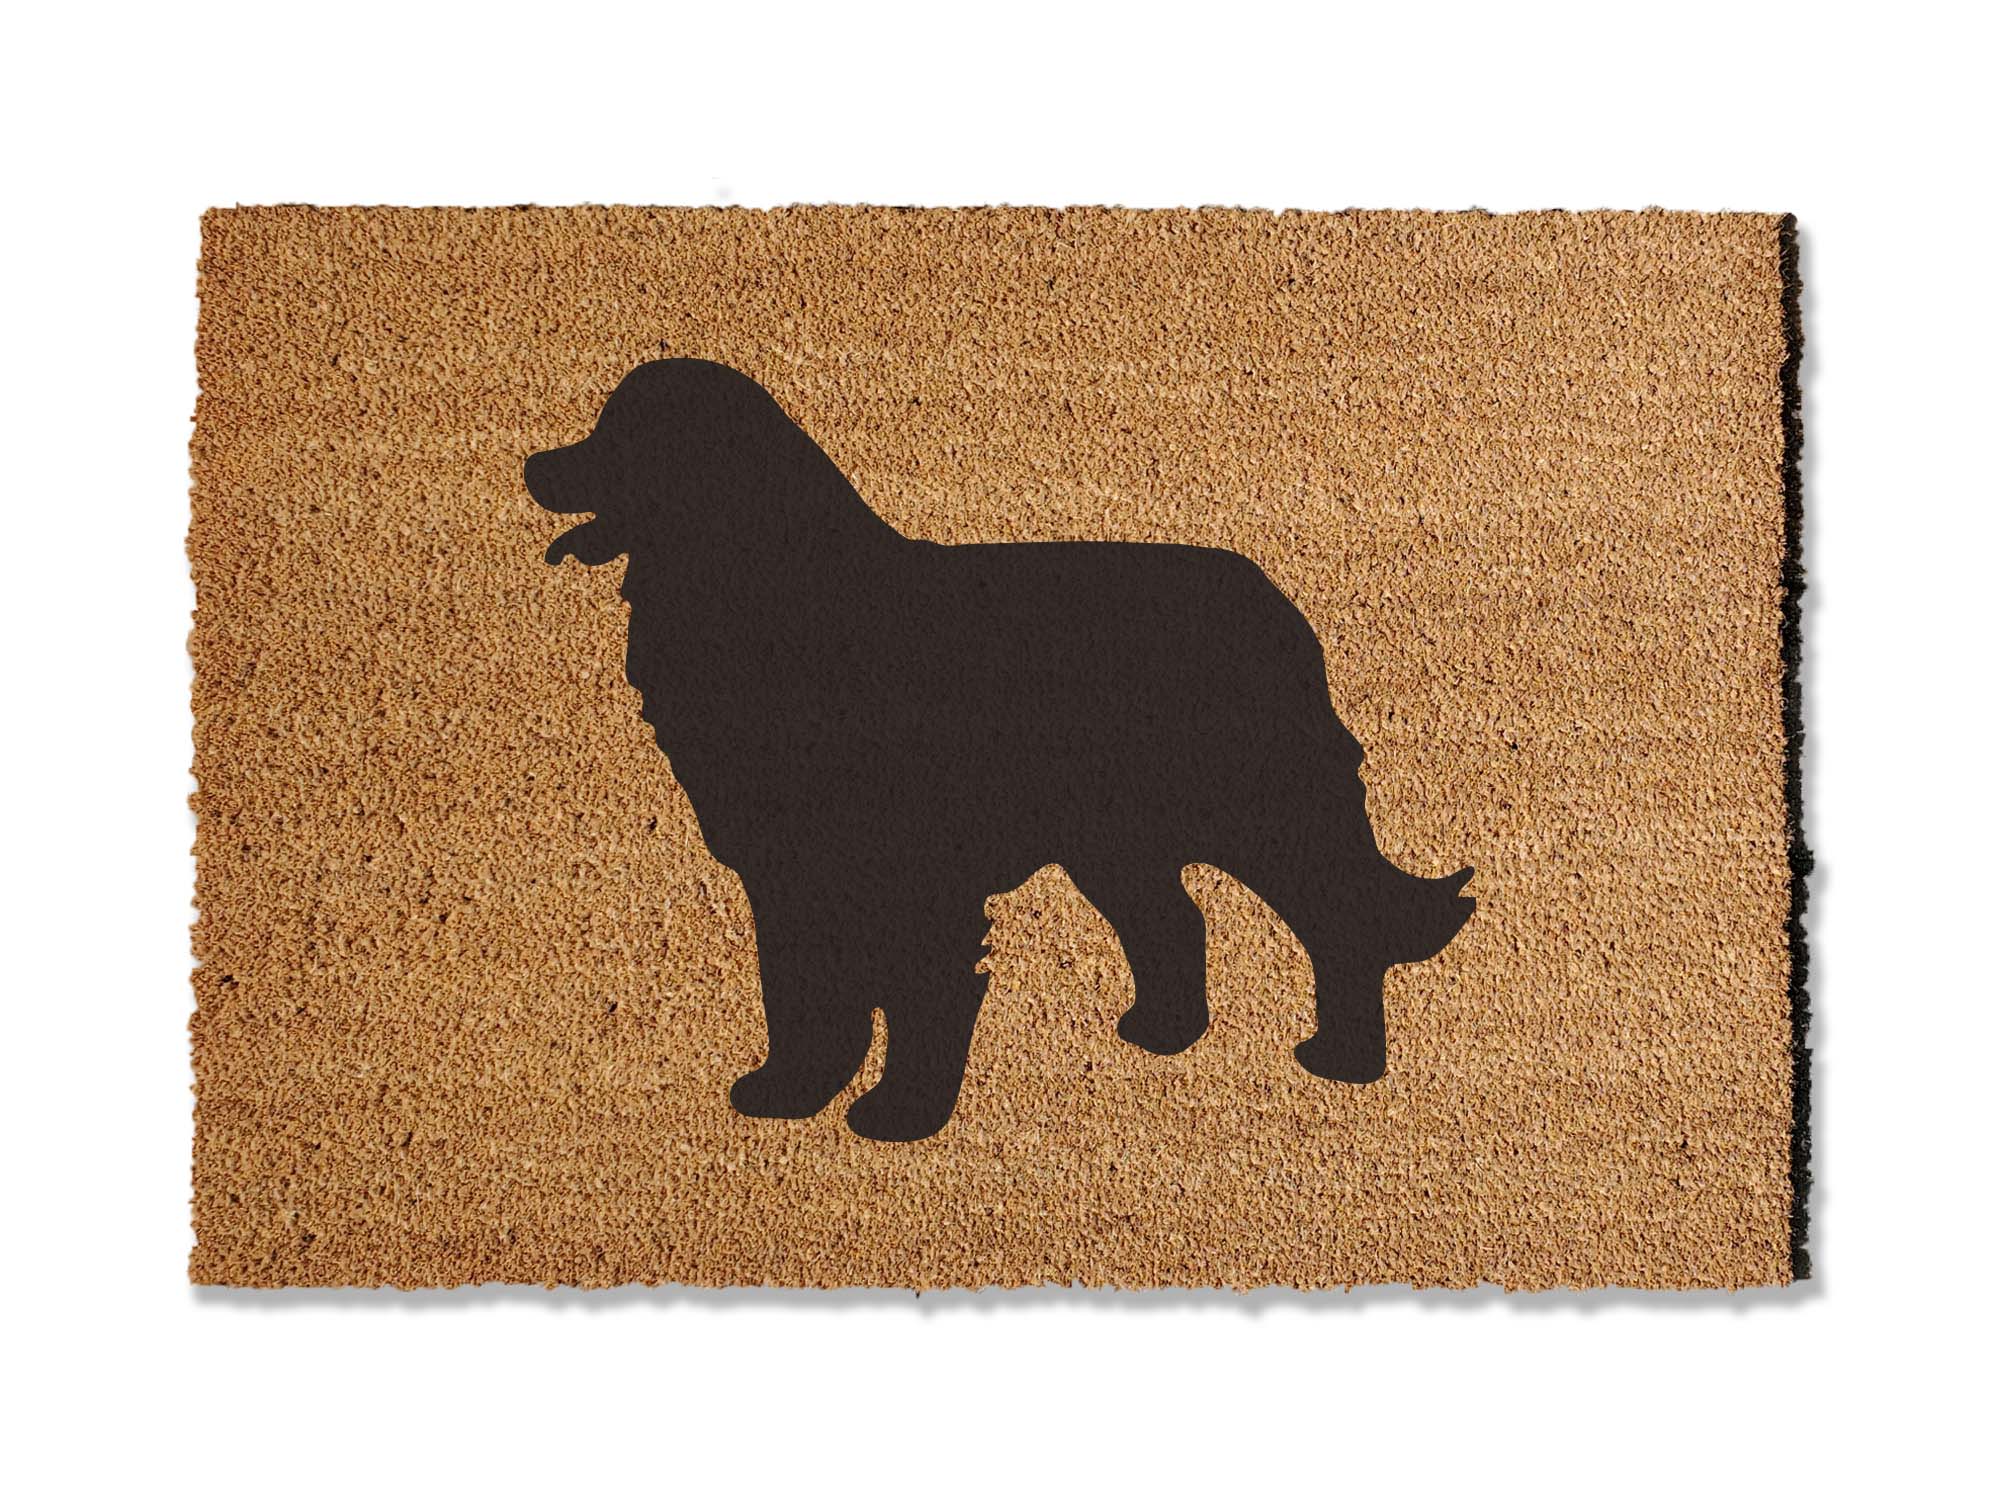 A coir doormat that is 24 inches by 36 inches with the silhouette of a Bernese Mountain Dog painted on it.